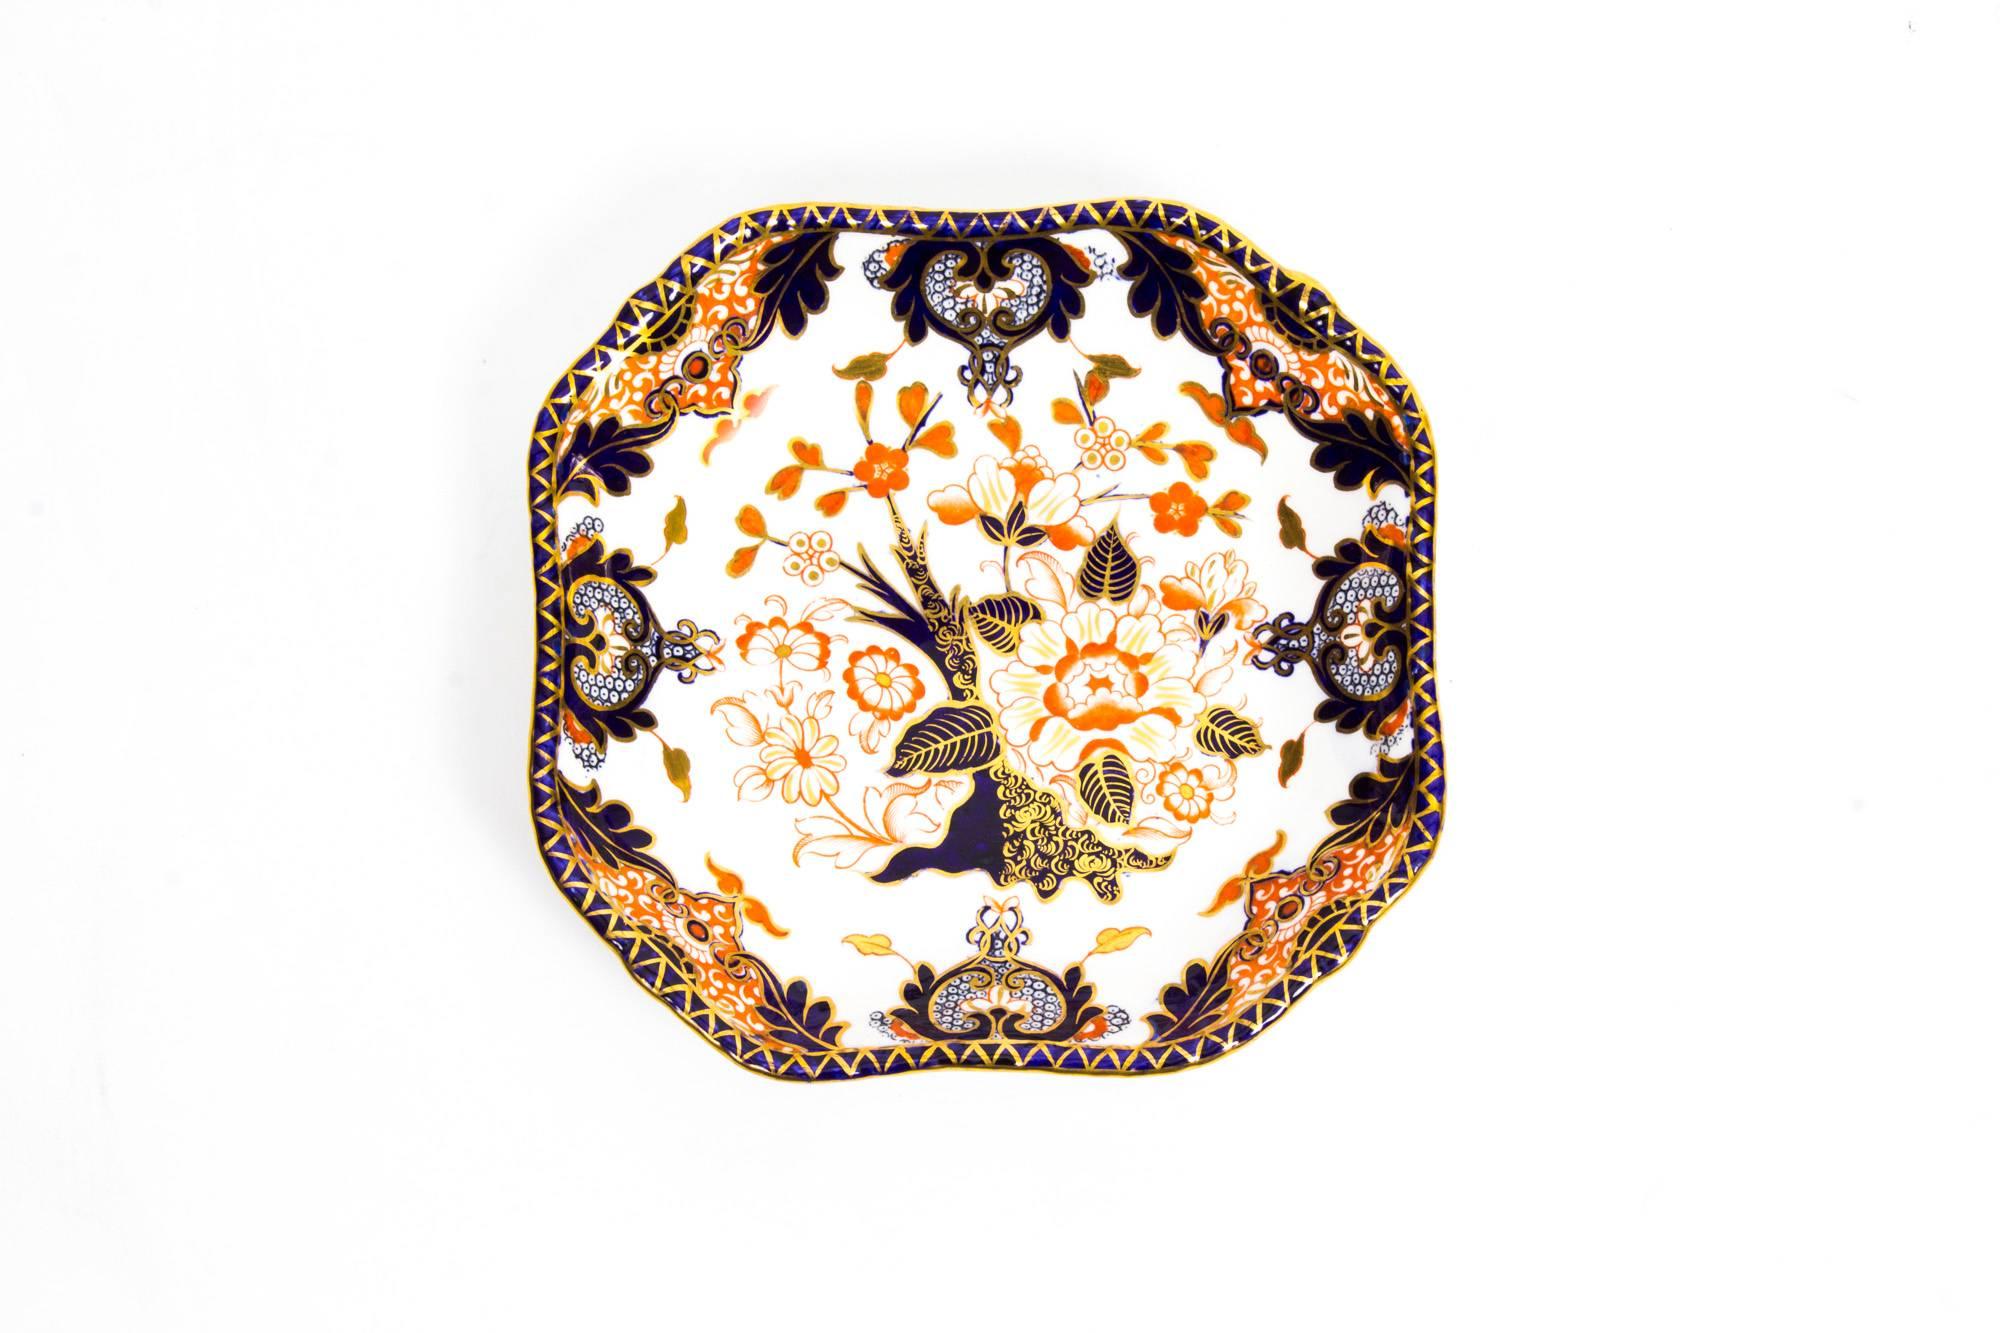 A superb pristeen 13-piece Crown Derby Kings Imari pattern dessert service, marked 1880 in date.

All hand-painted with cobalt blue borders high-lighted with gold zig-zag geometric pattern, and cobalt blue leaves radiating from it. The centre